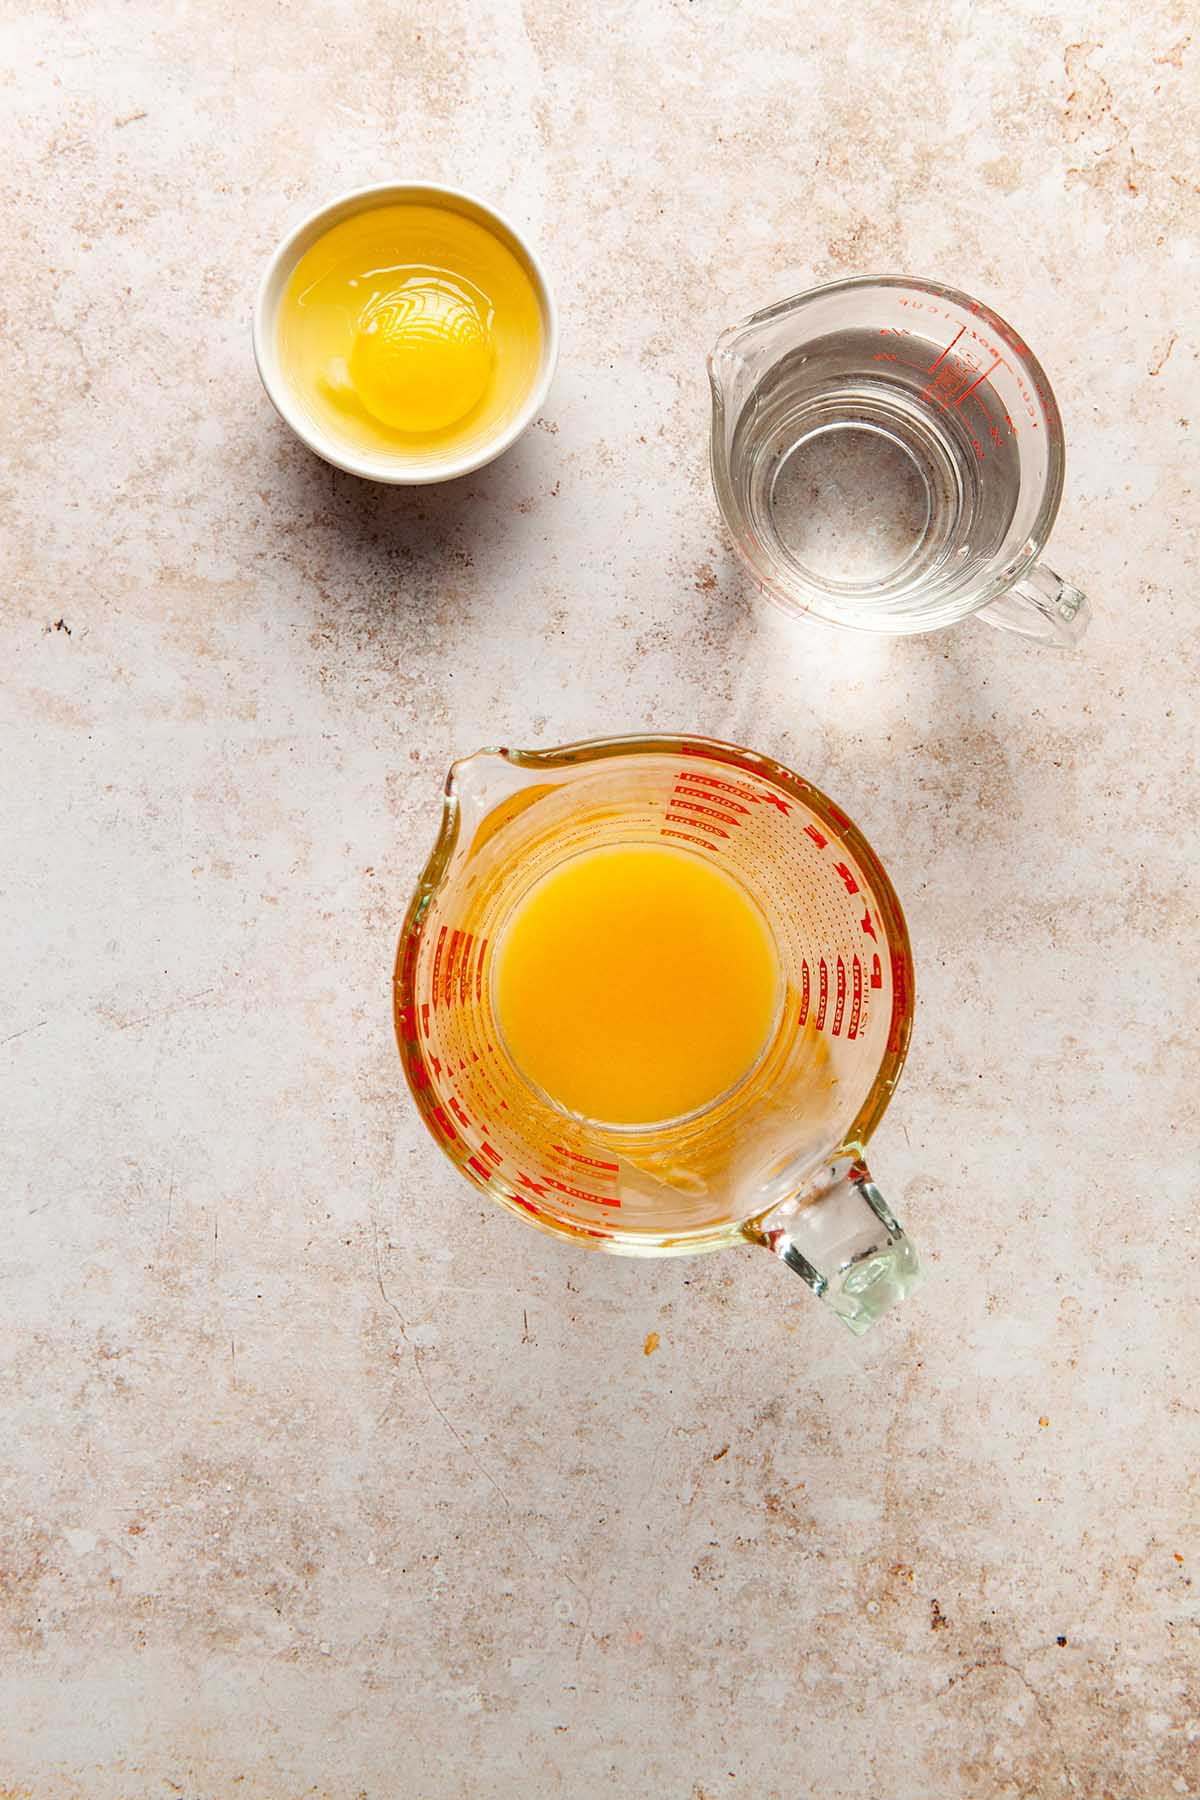 Orange juice, water, and an egg in separate vessels waiting to be mixed together.